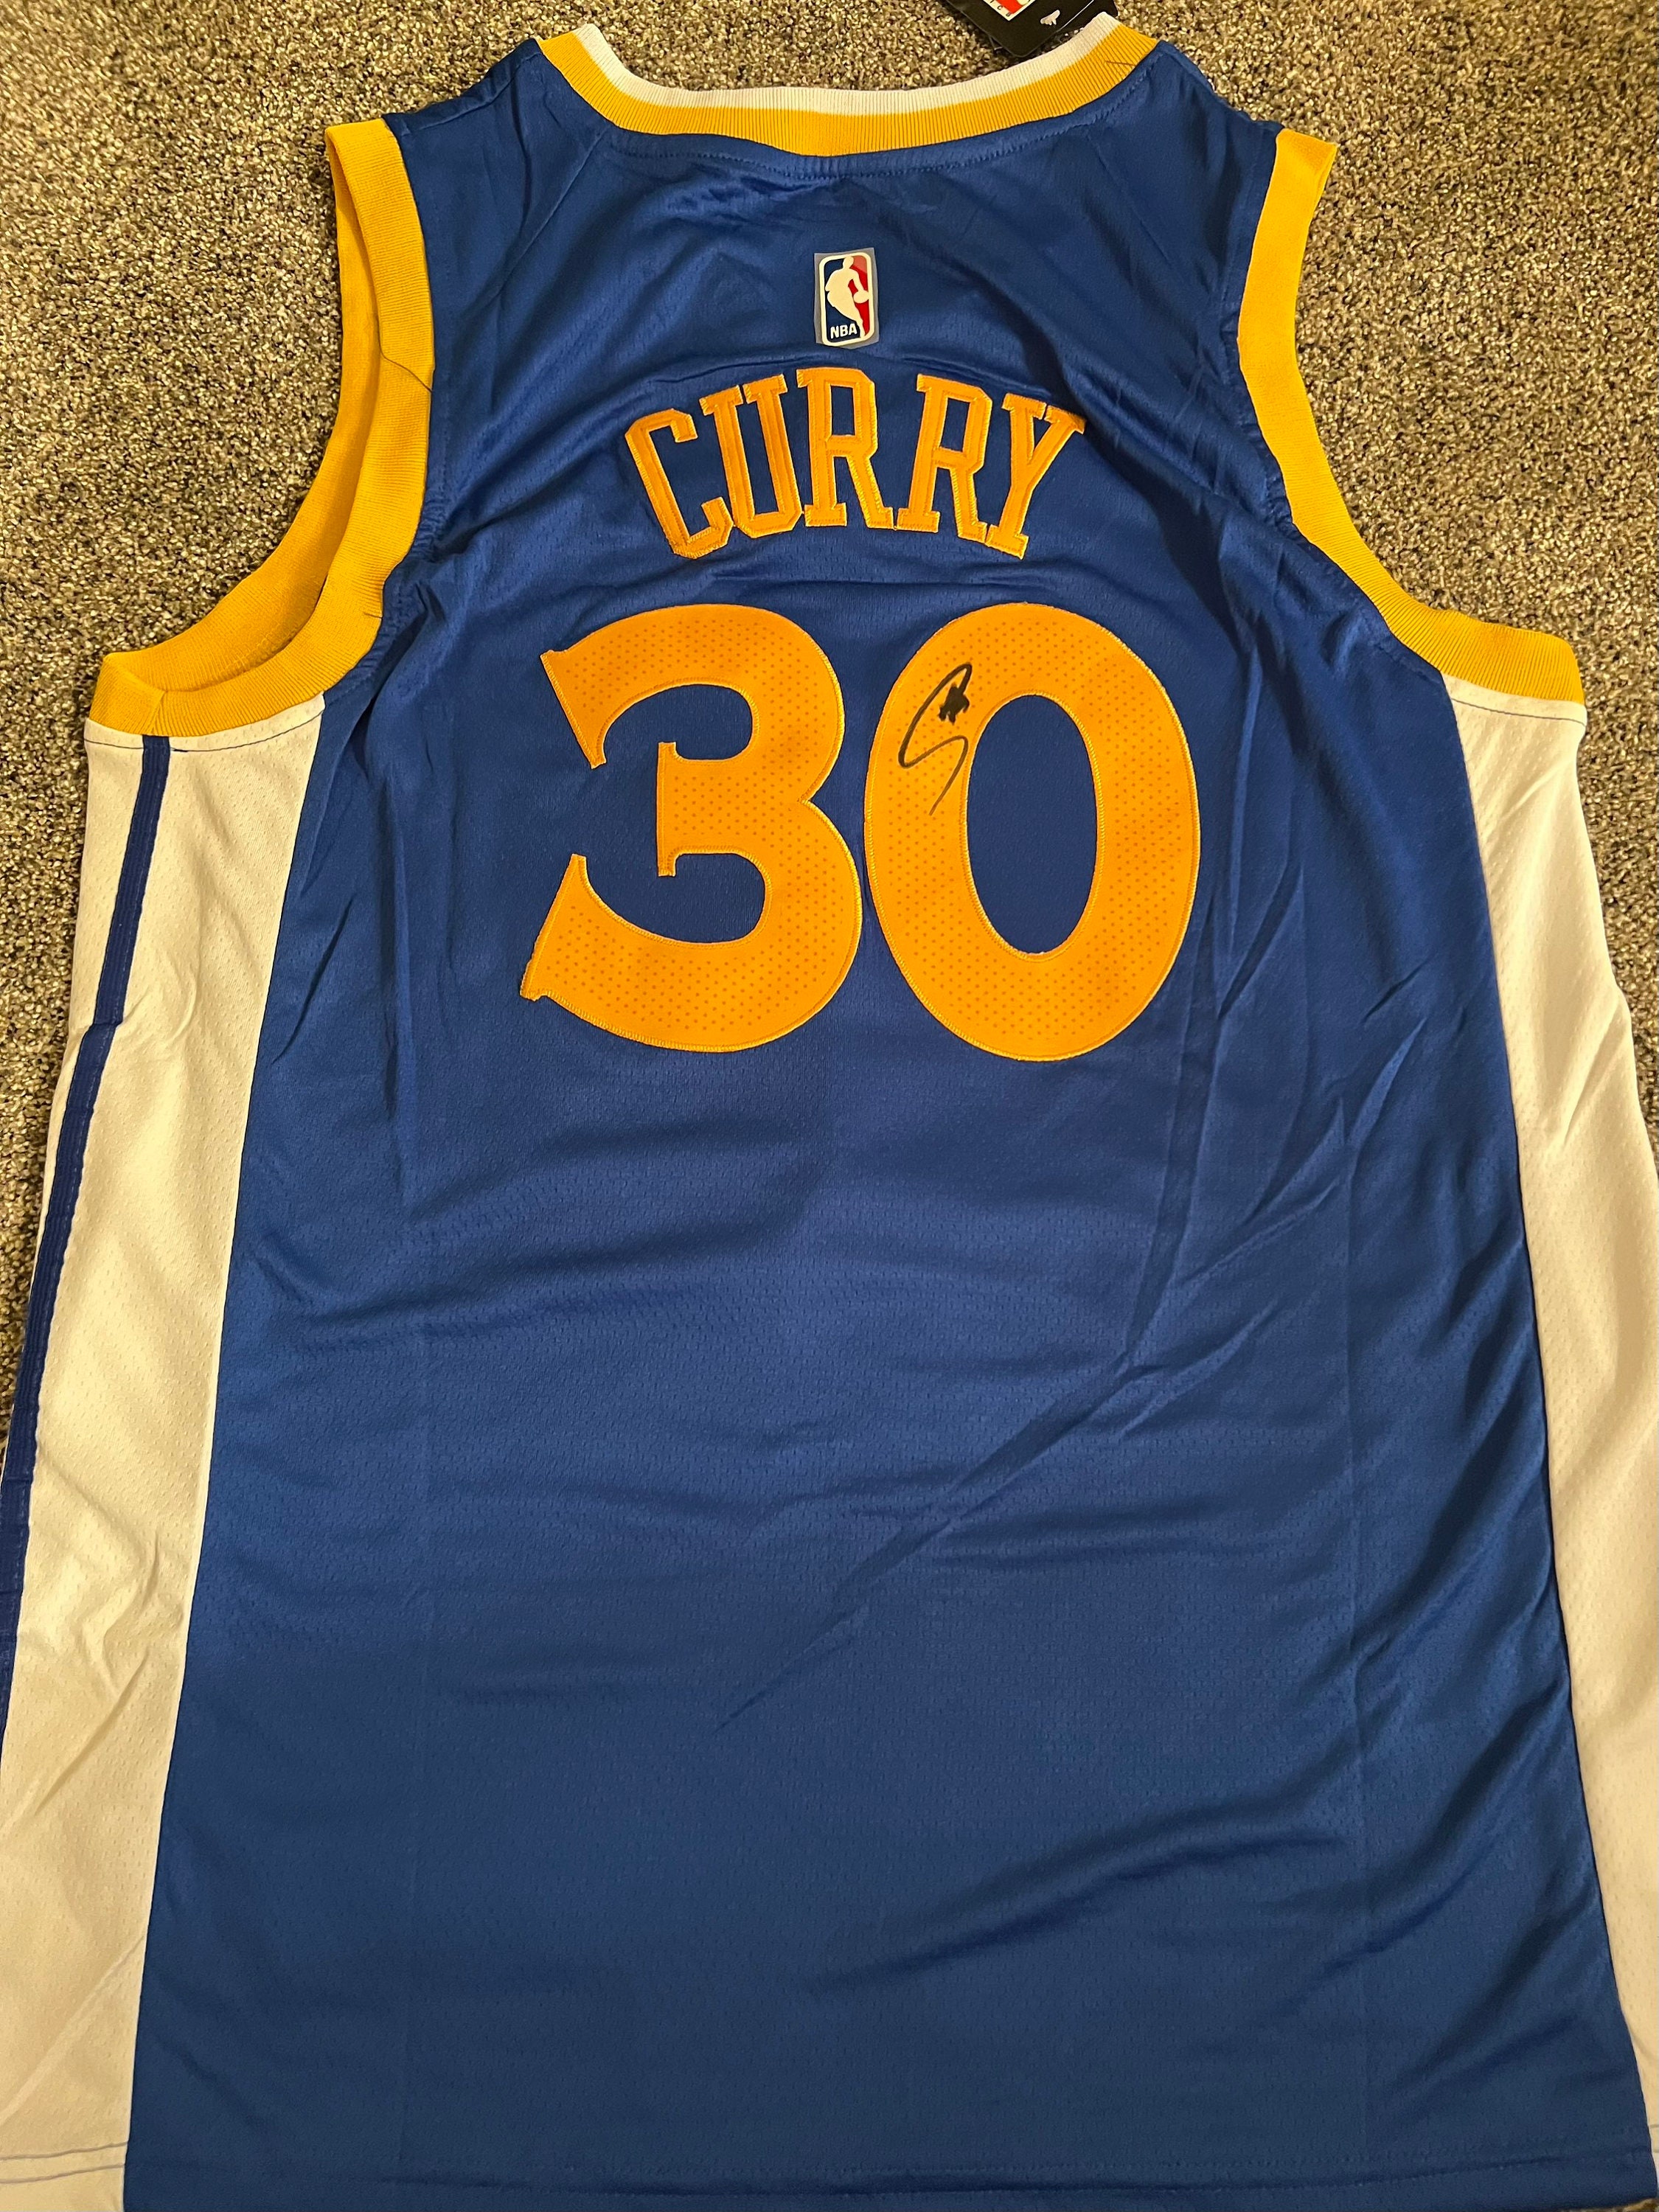 Stephen Curry Autographed Memorabilia  Signed Photo, Jersey, Collectibles  & Merchandise